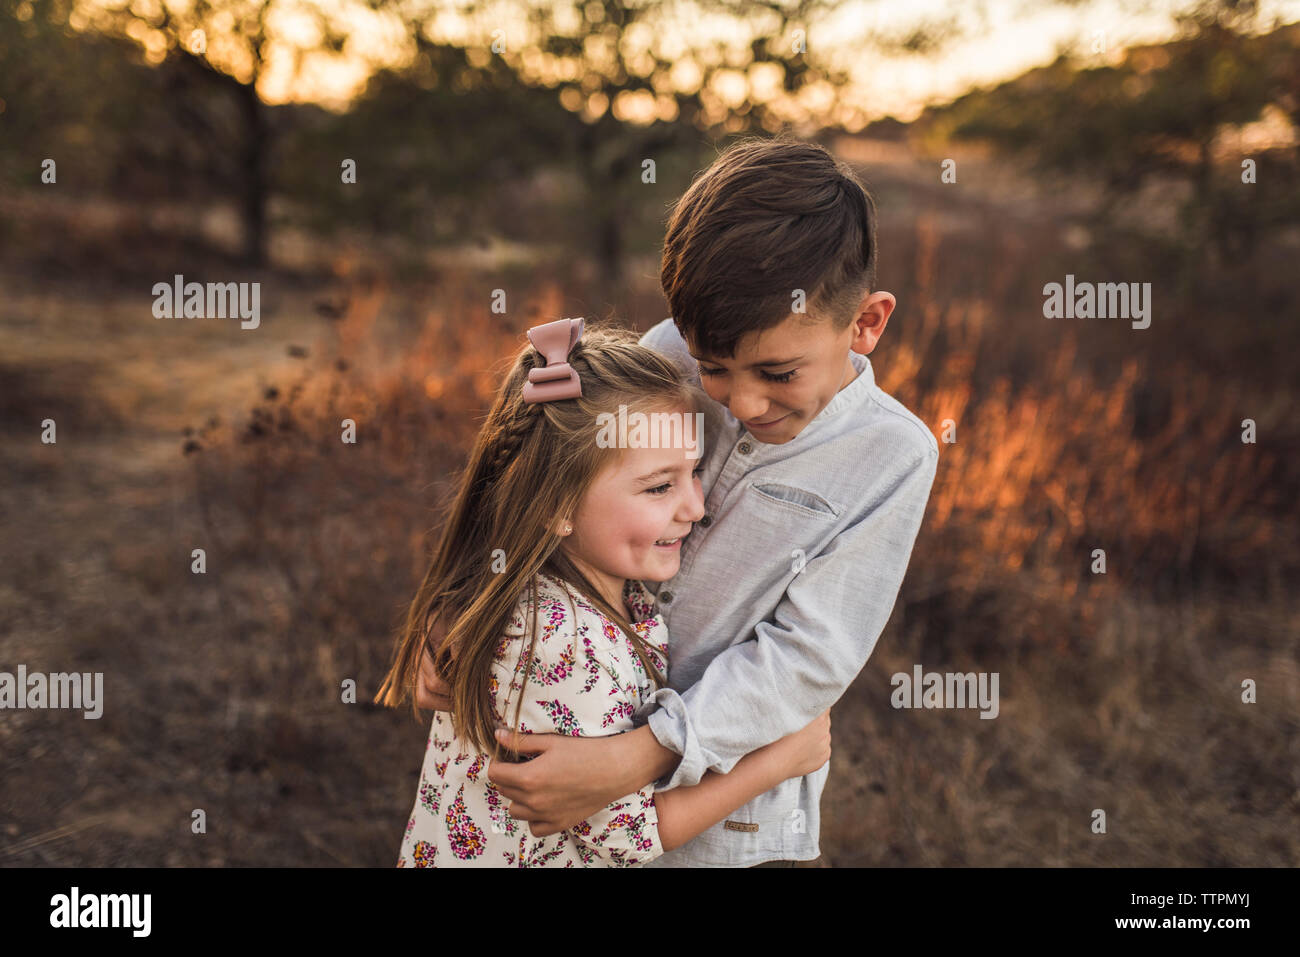 Young girl and boy embracing in California field at sunset Stock Photo